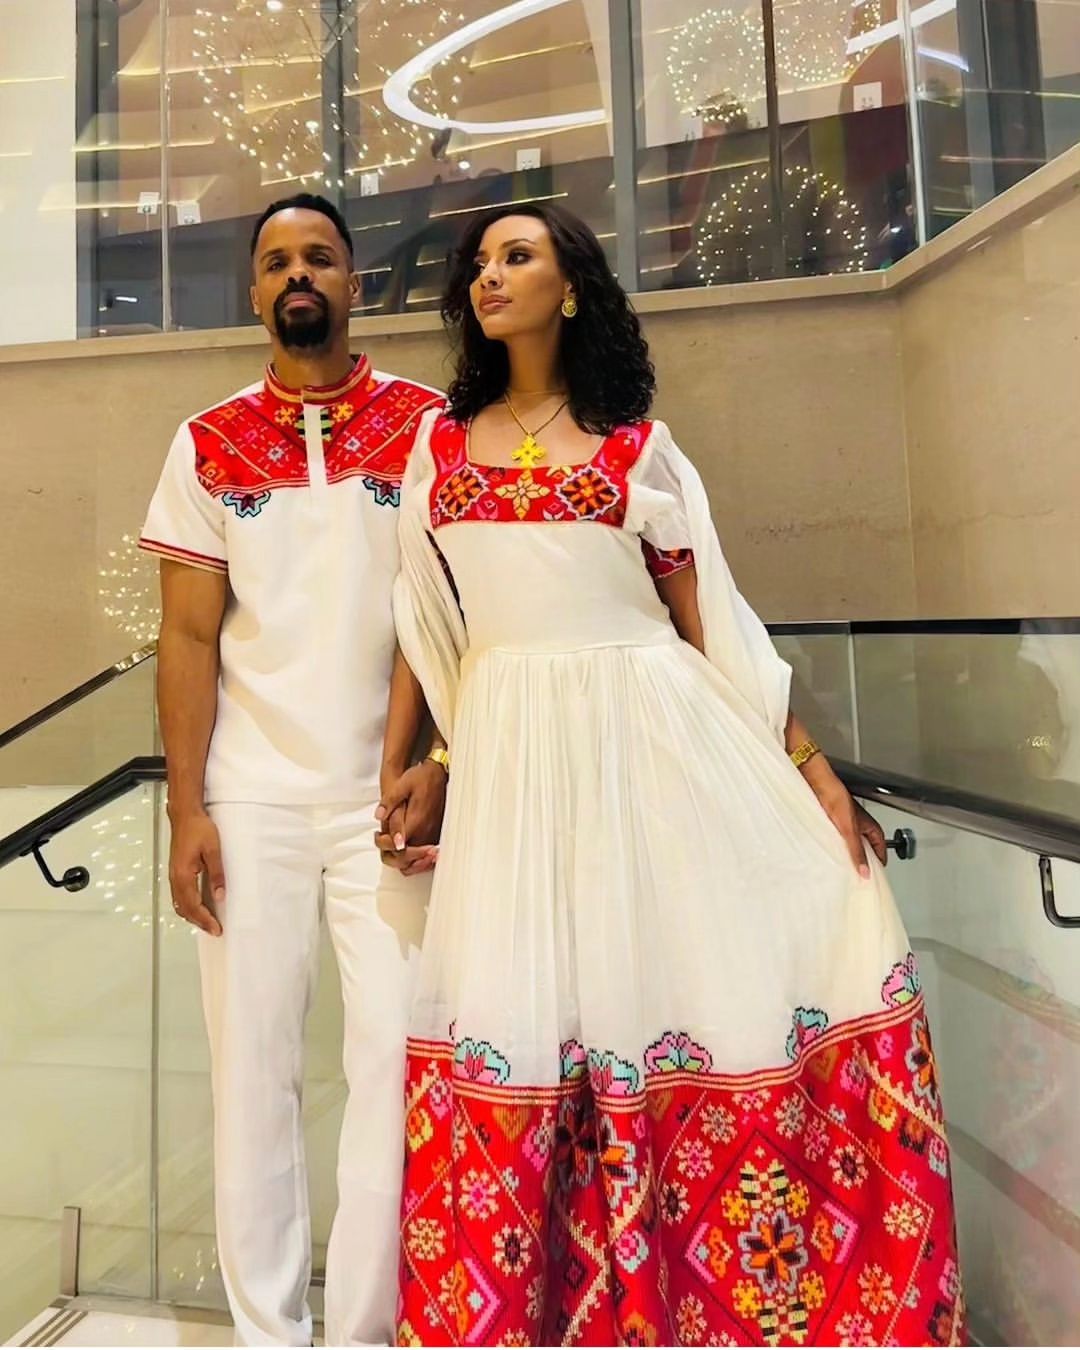 Passionate Red Bliss: Vibrant Habesha Couples Outfit in Menen Fabric